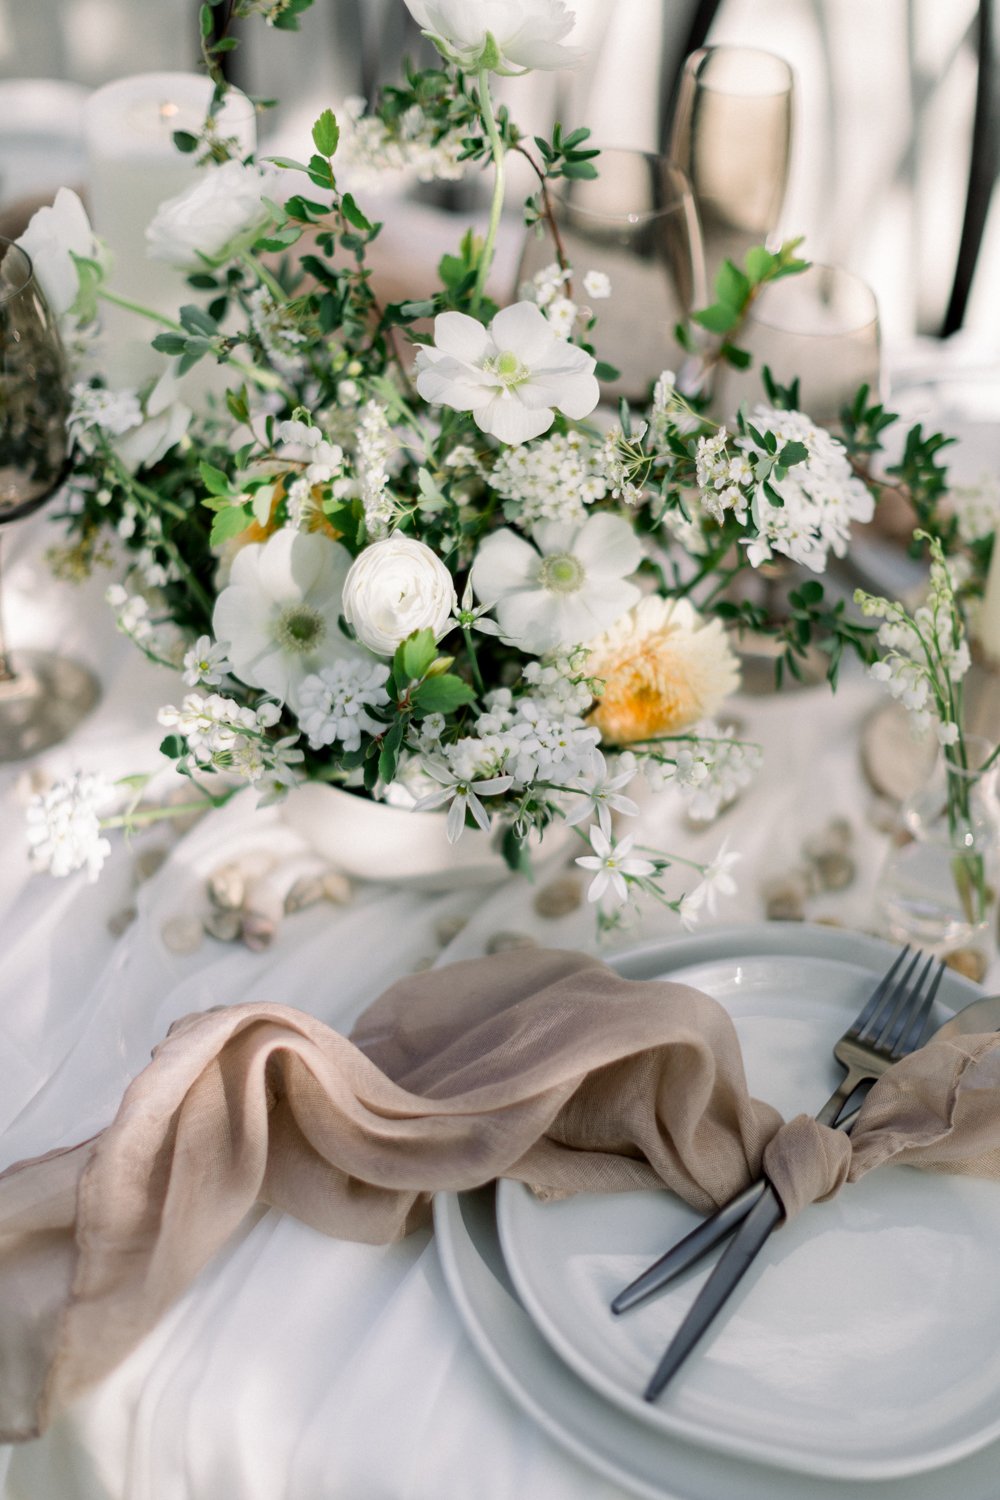 White and green centerpiece